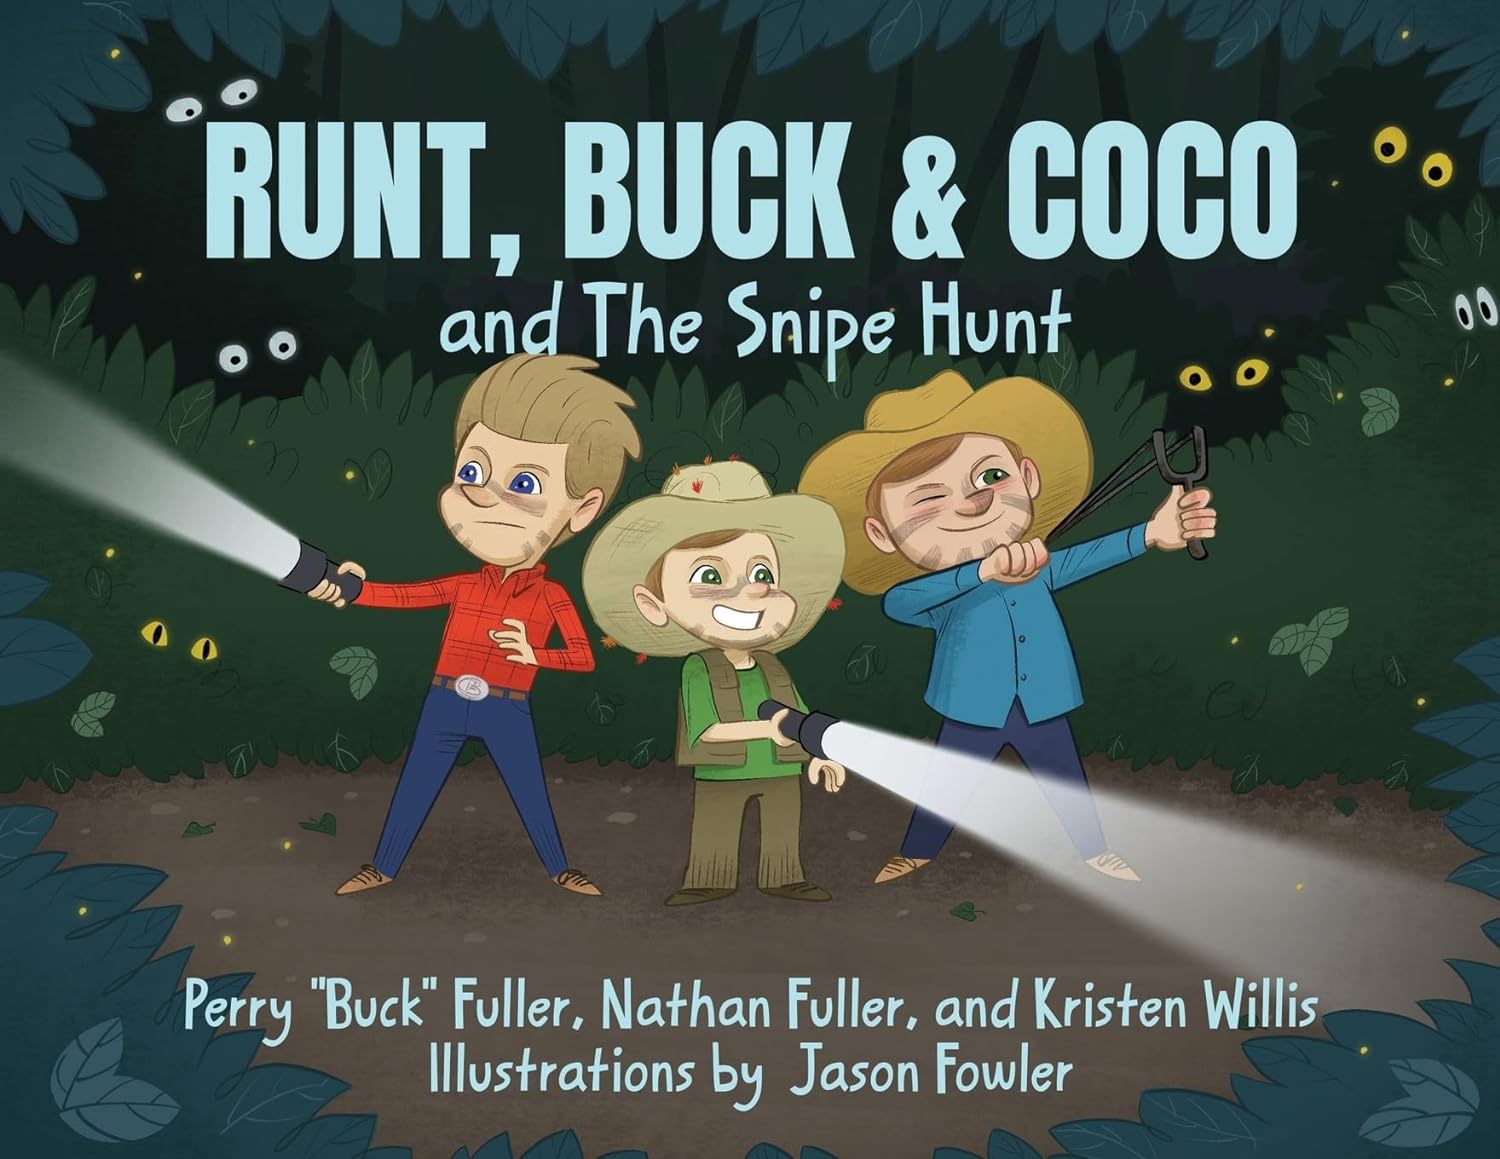 New children’s book "Runt, Buck & Coco and The Snipe Hunt" by Perry Fuller is released, an endearing story about triplet brothers who have an imaginative adventure in the woods